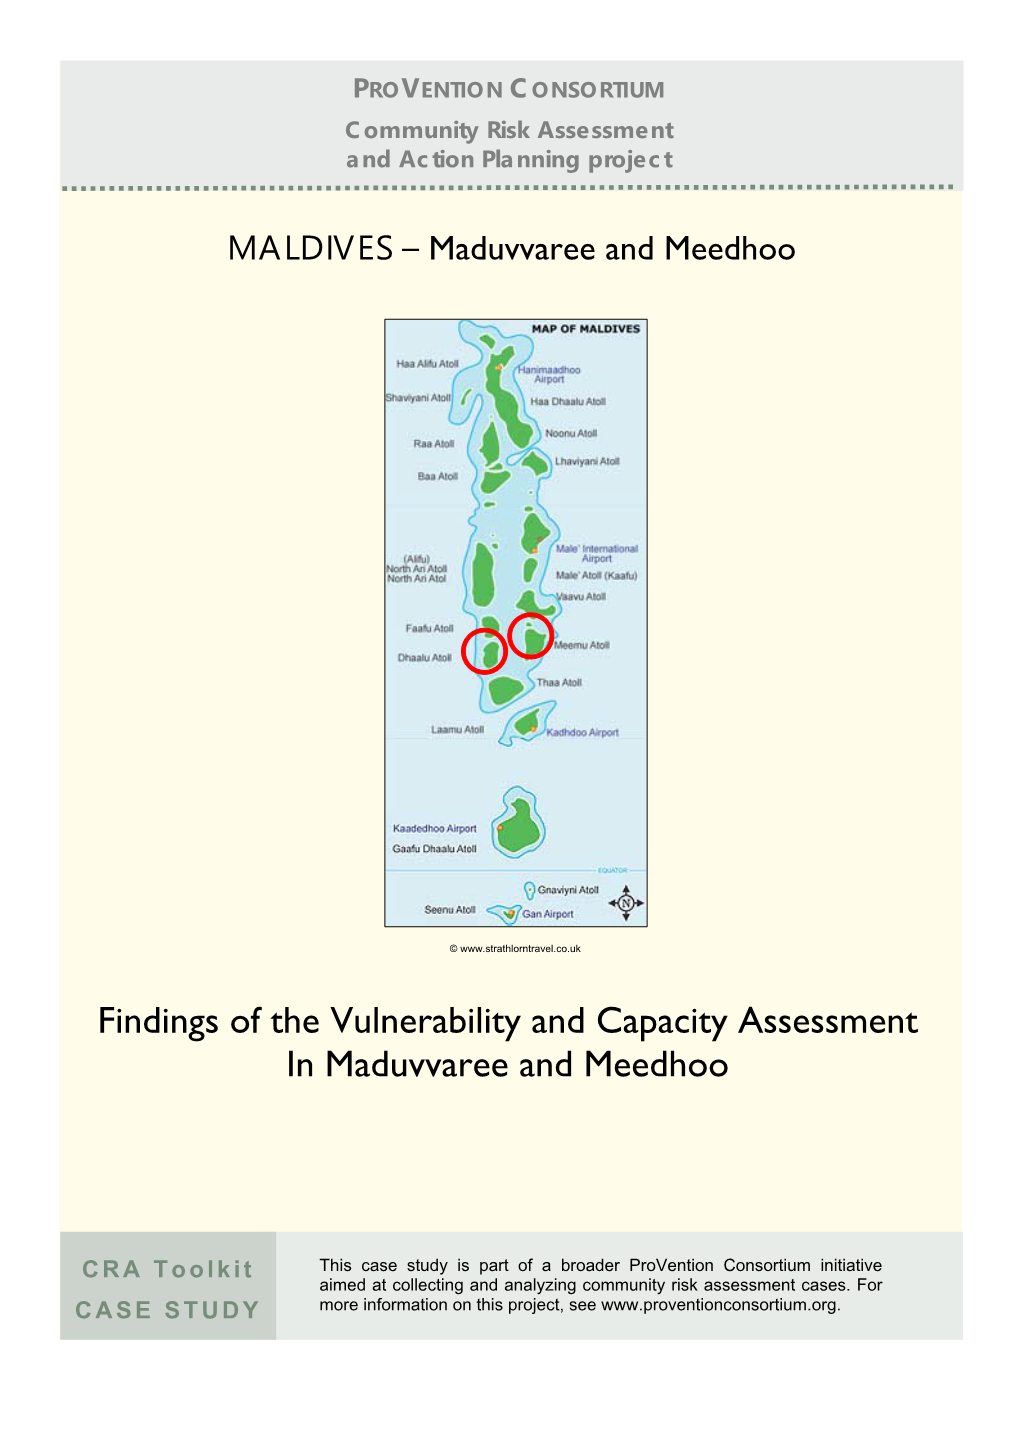 Findings of the Vulnerability and Capacity Assessment in Maduvvaree and Meedhoo